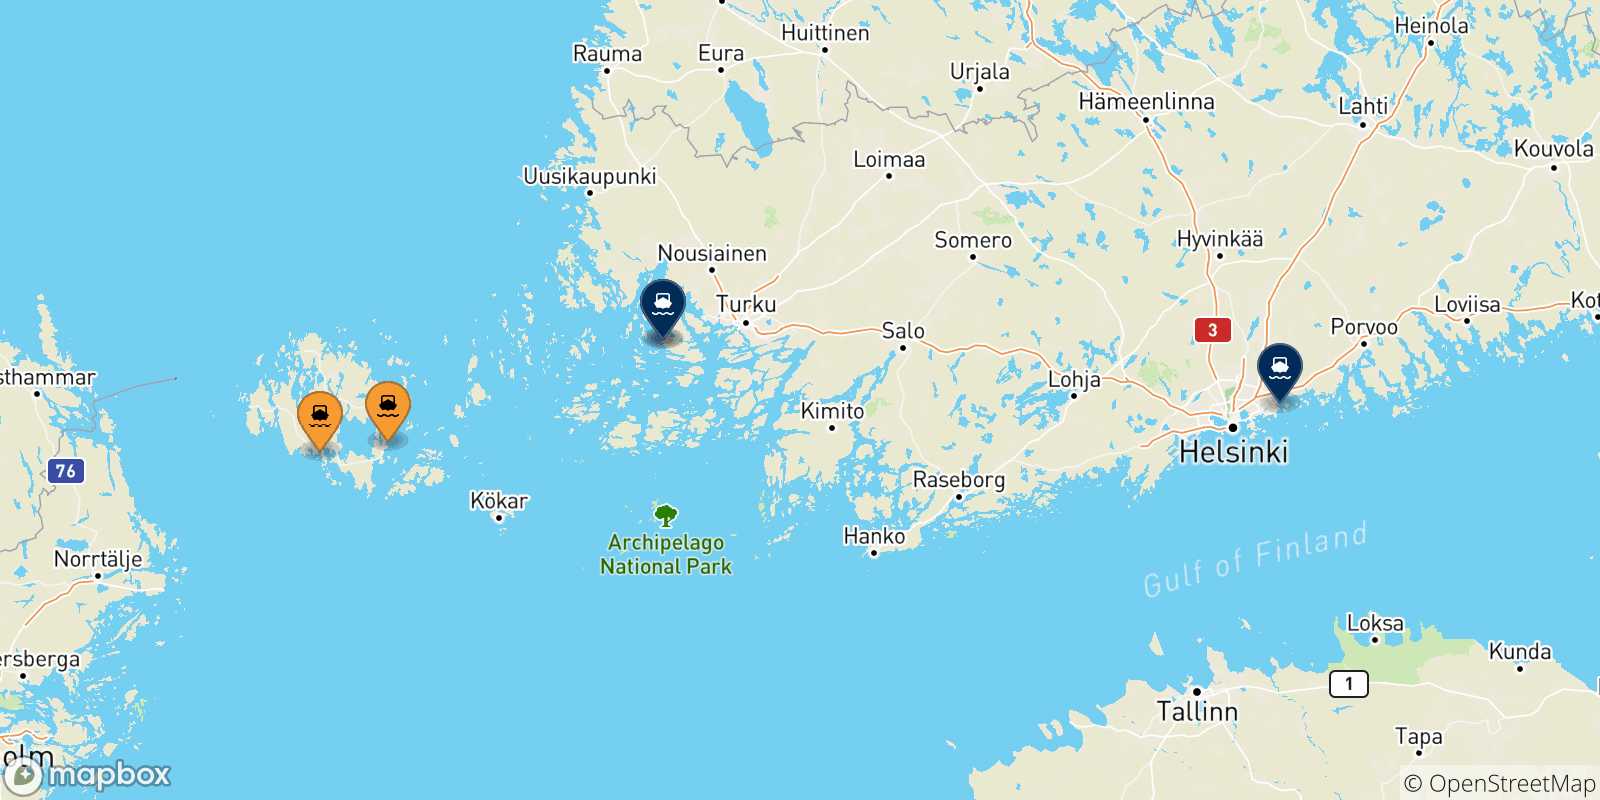 Map of the possible routes between Aland Islands and Finland